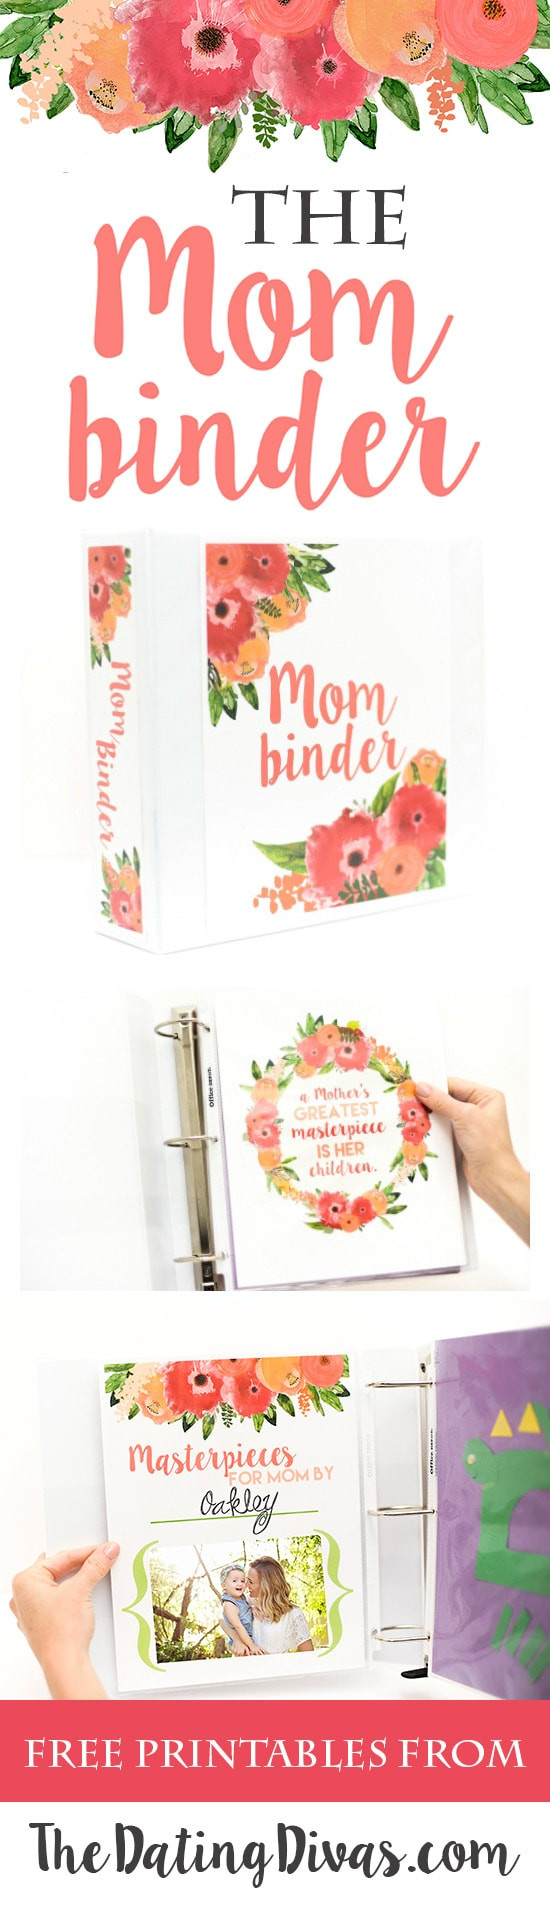 Anniversary Gift For Parents DIY
 22 Easy But Thoughtful DIY Gifts To Make For Your Parents